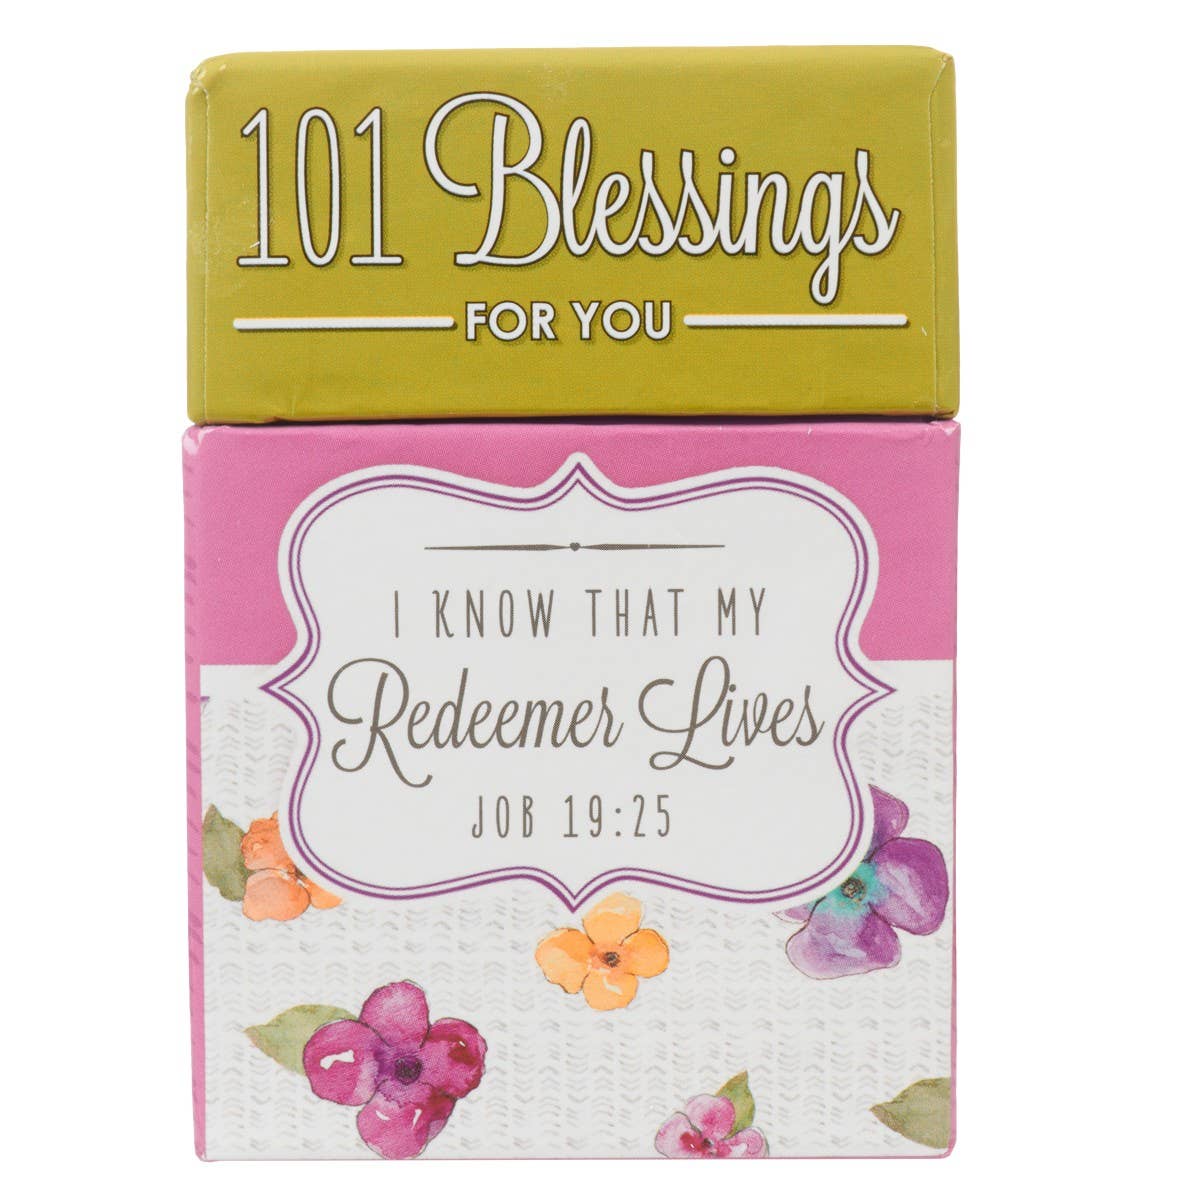 101 Blessings for You - Job 19:25